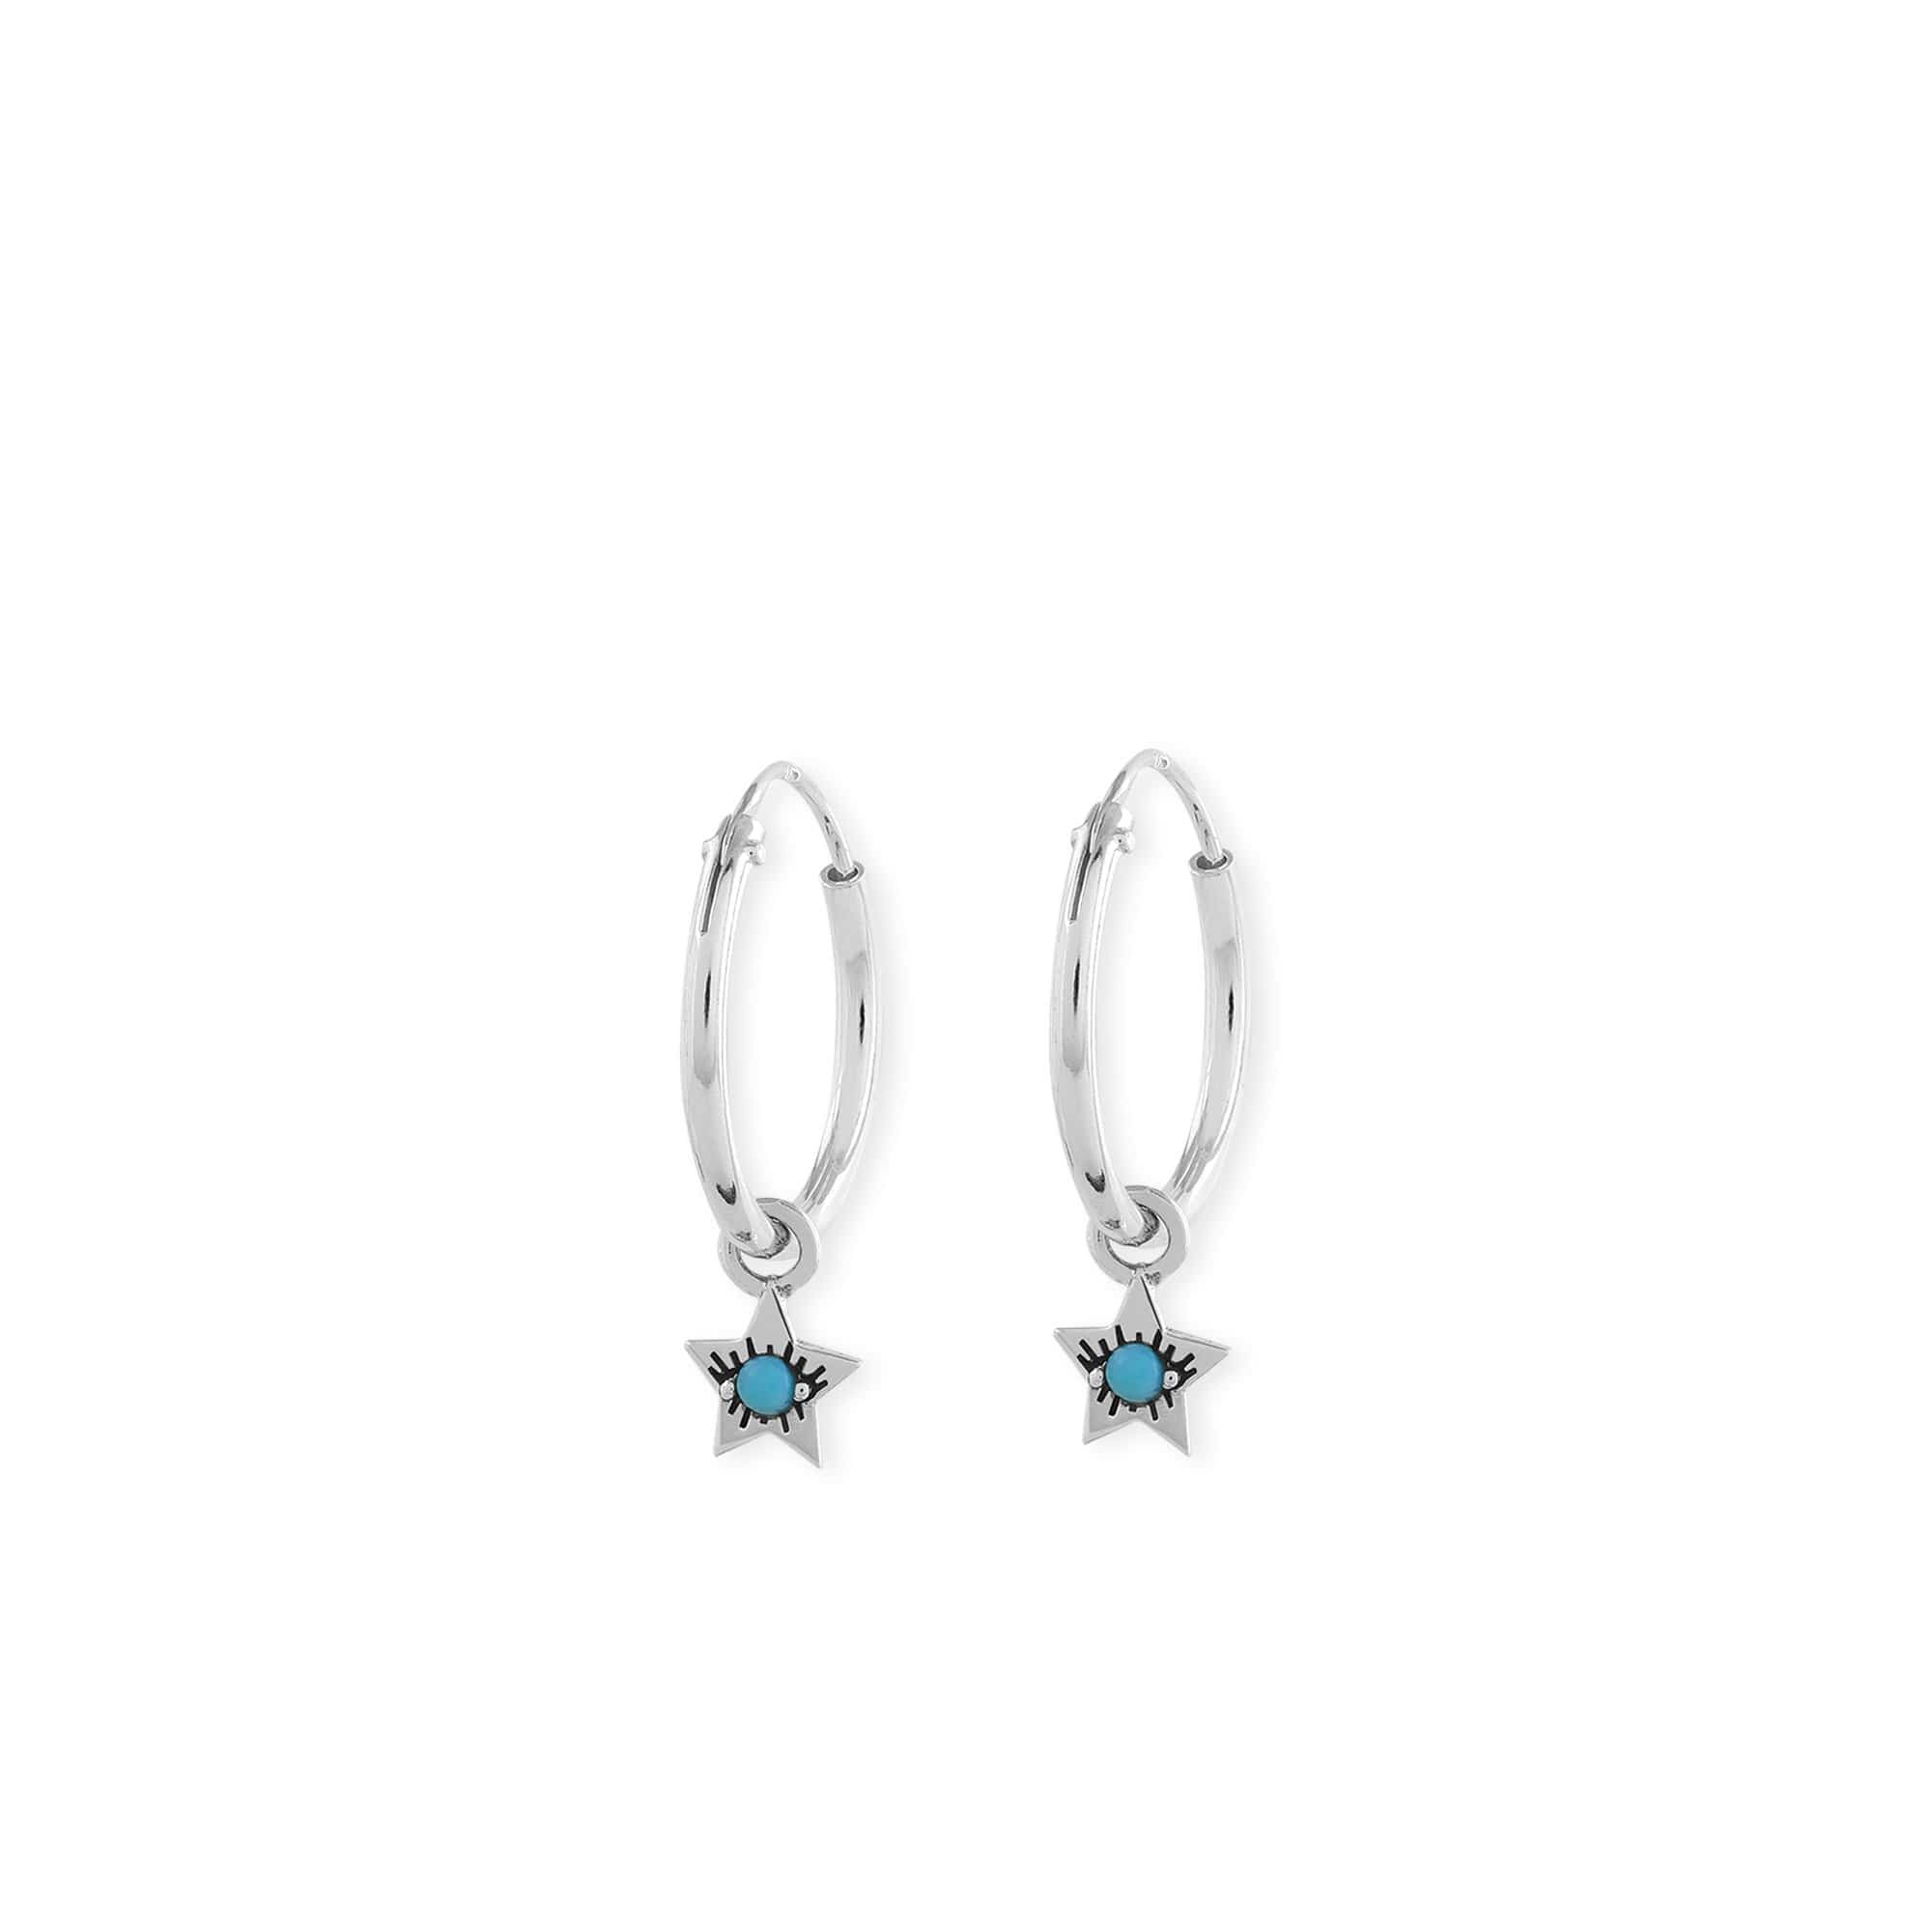 Boma Jewelry Earrings Evil Eye Star Hoops with Turquoise